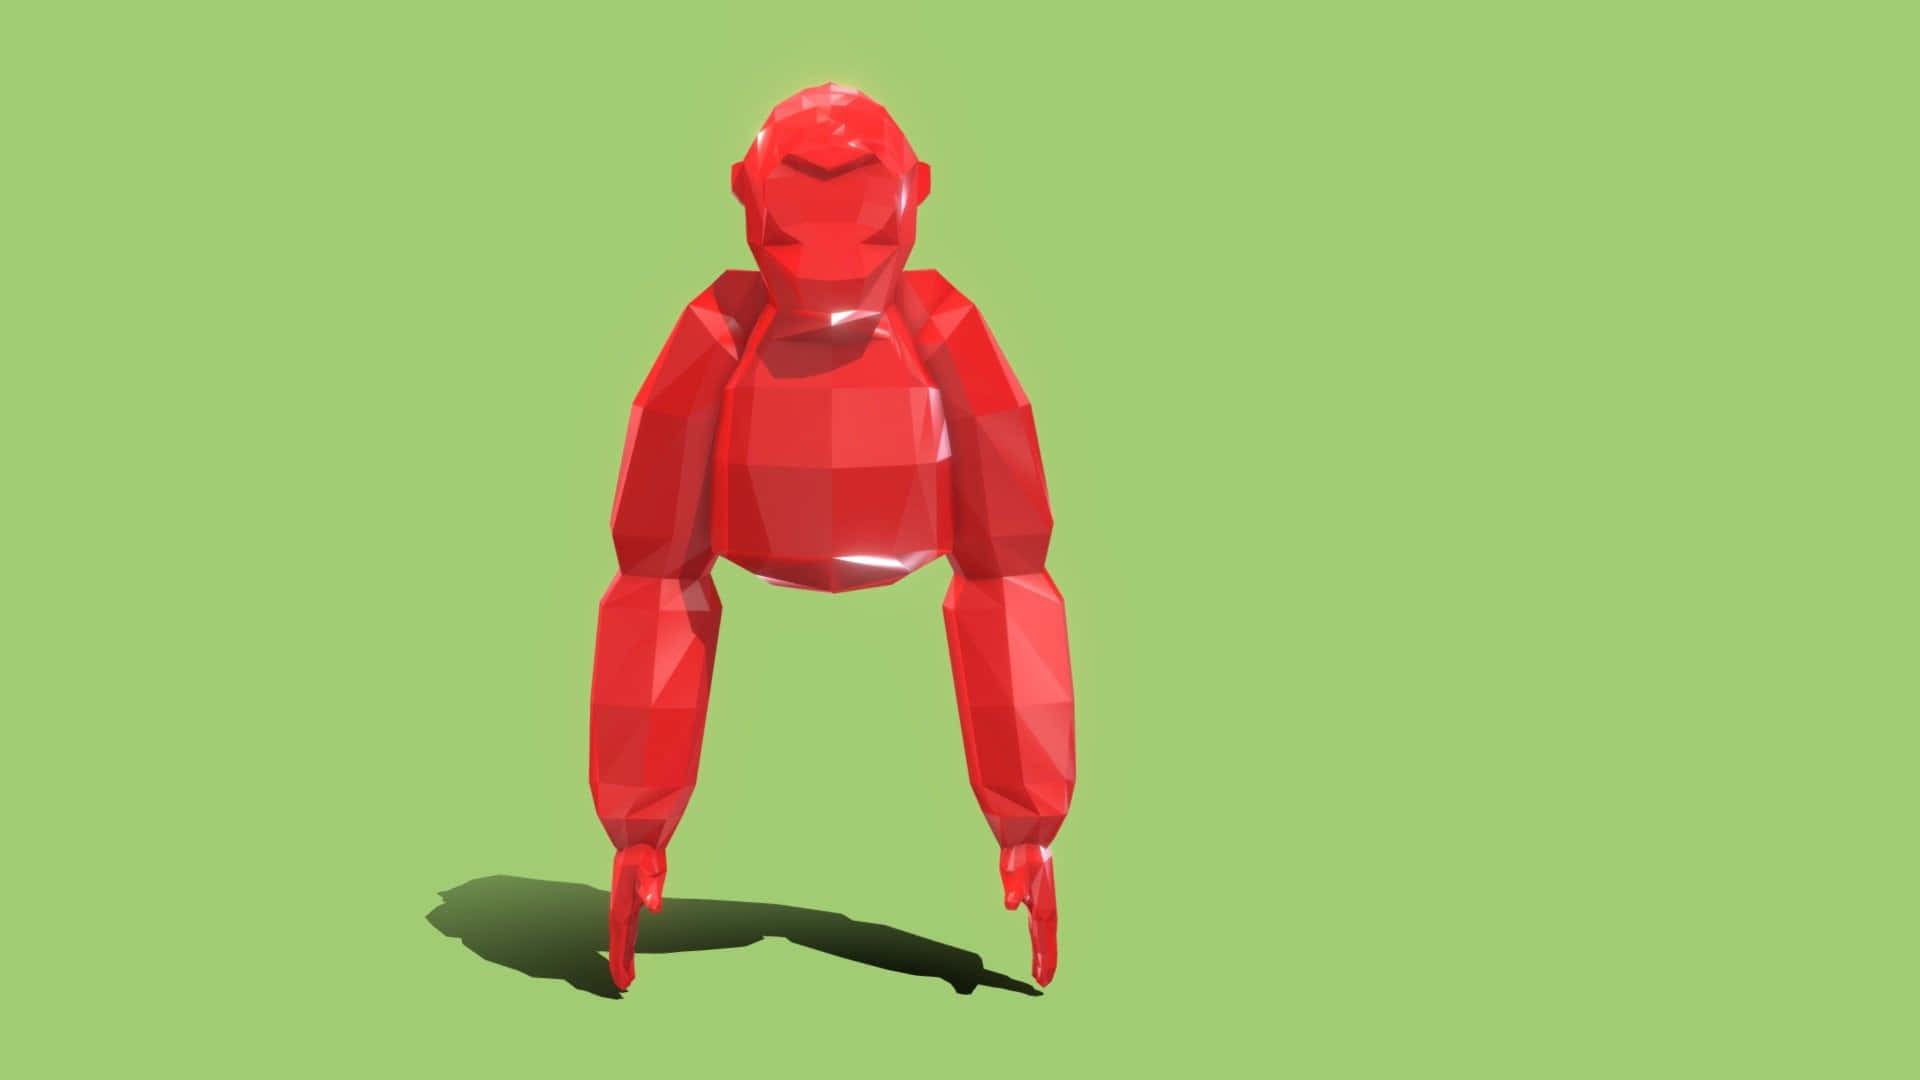 A Red Polygonal Robot Standing On A Green Background Background